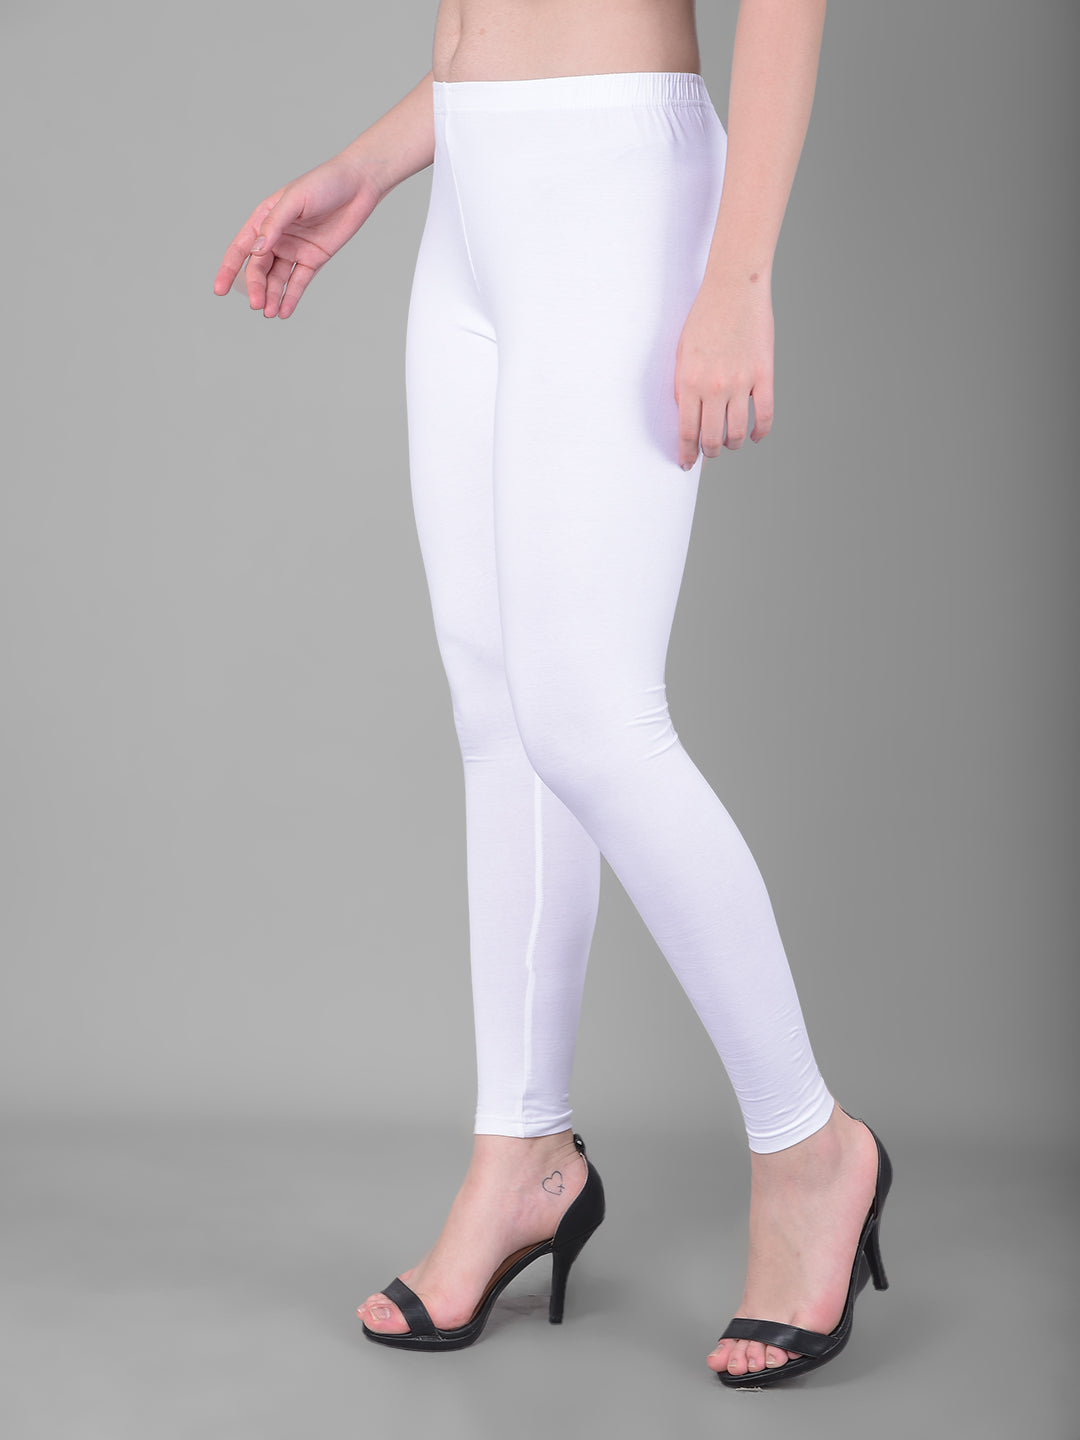 Comfort Lady Ankle Length Leggings at Rs 250